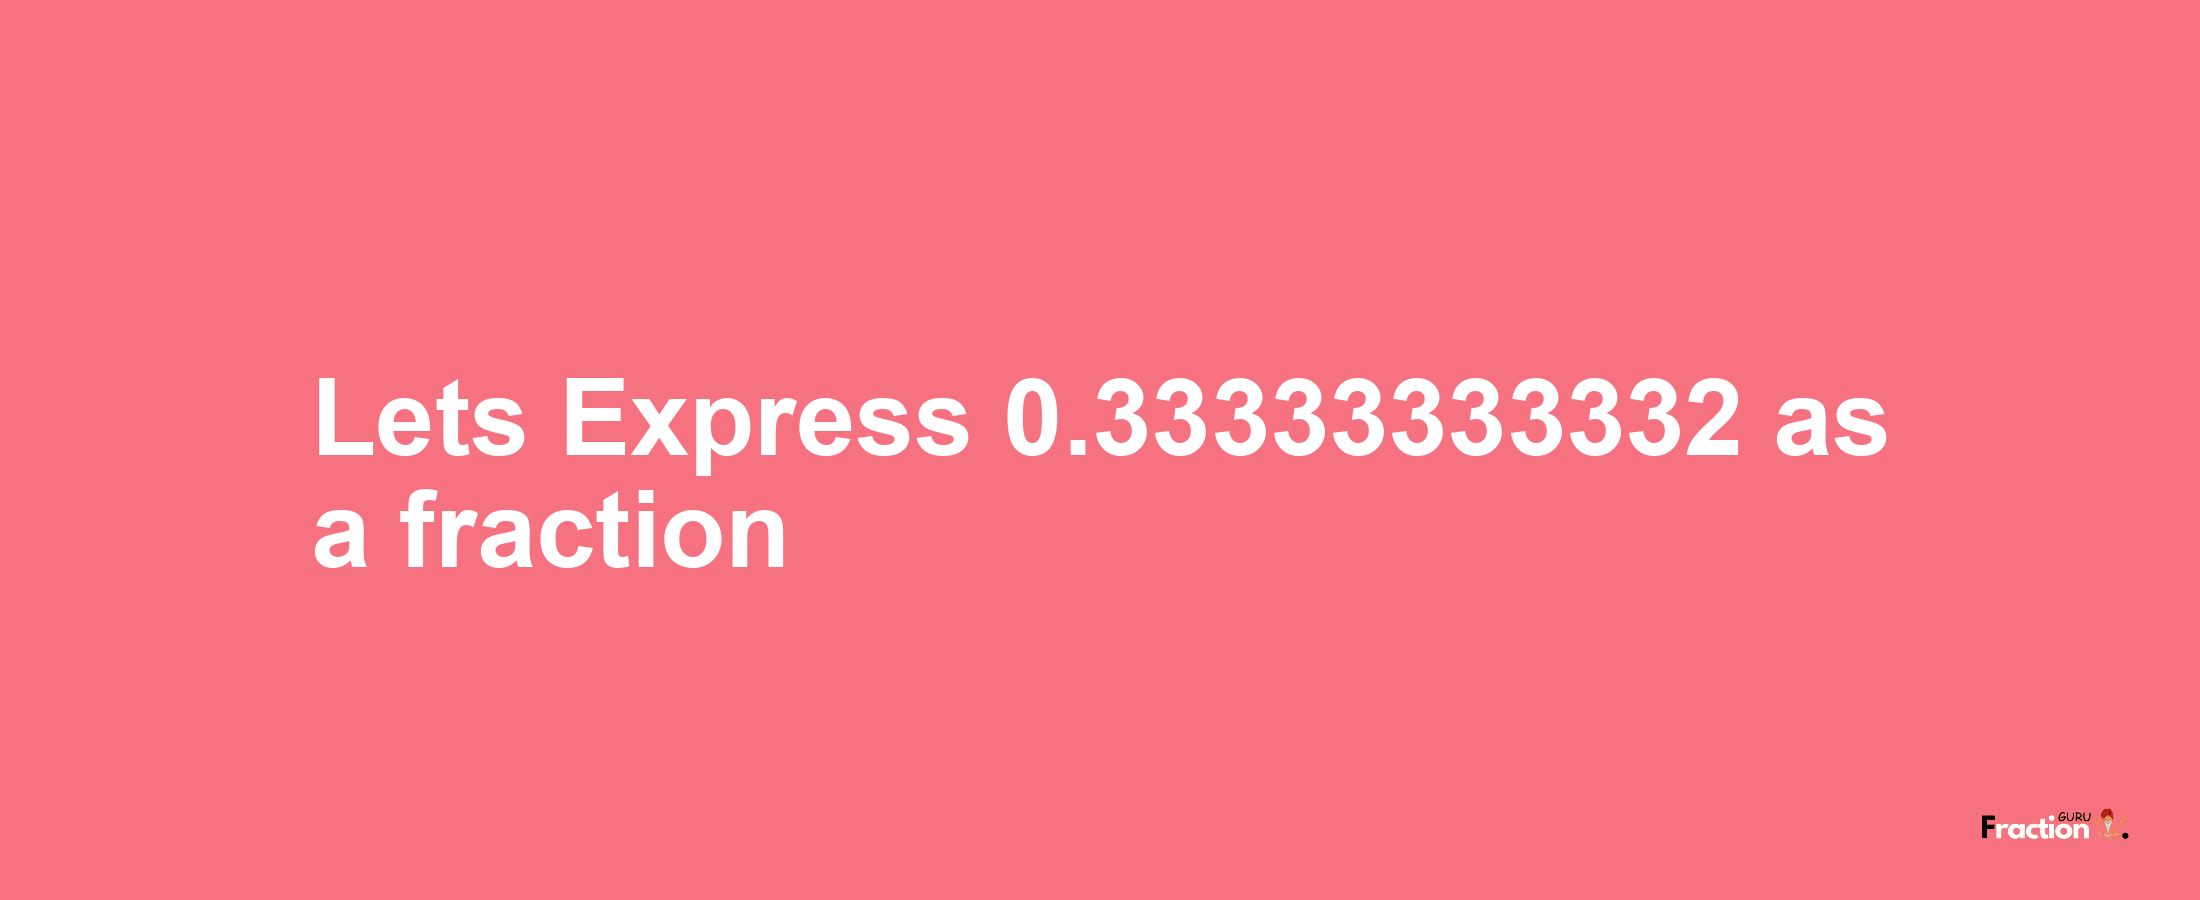 Lets Express 0.33333333332 as afraction